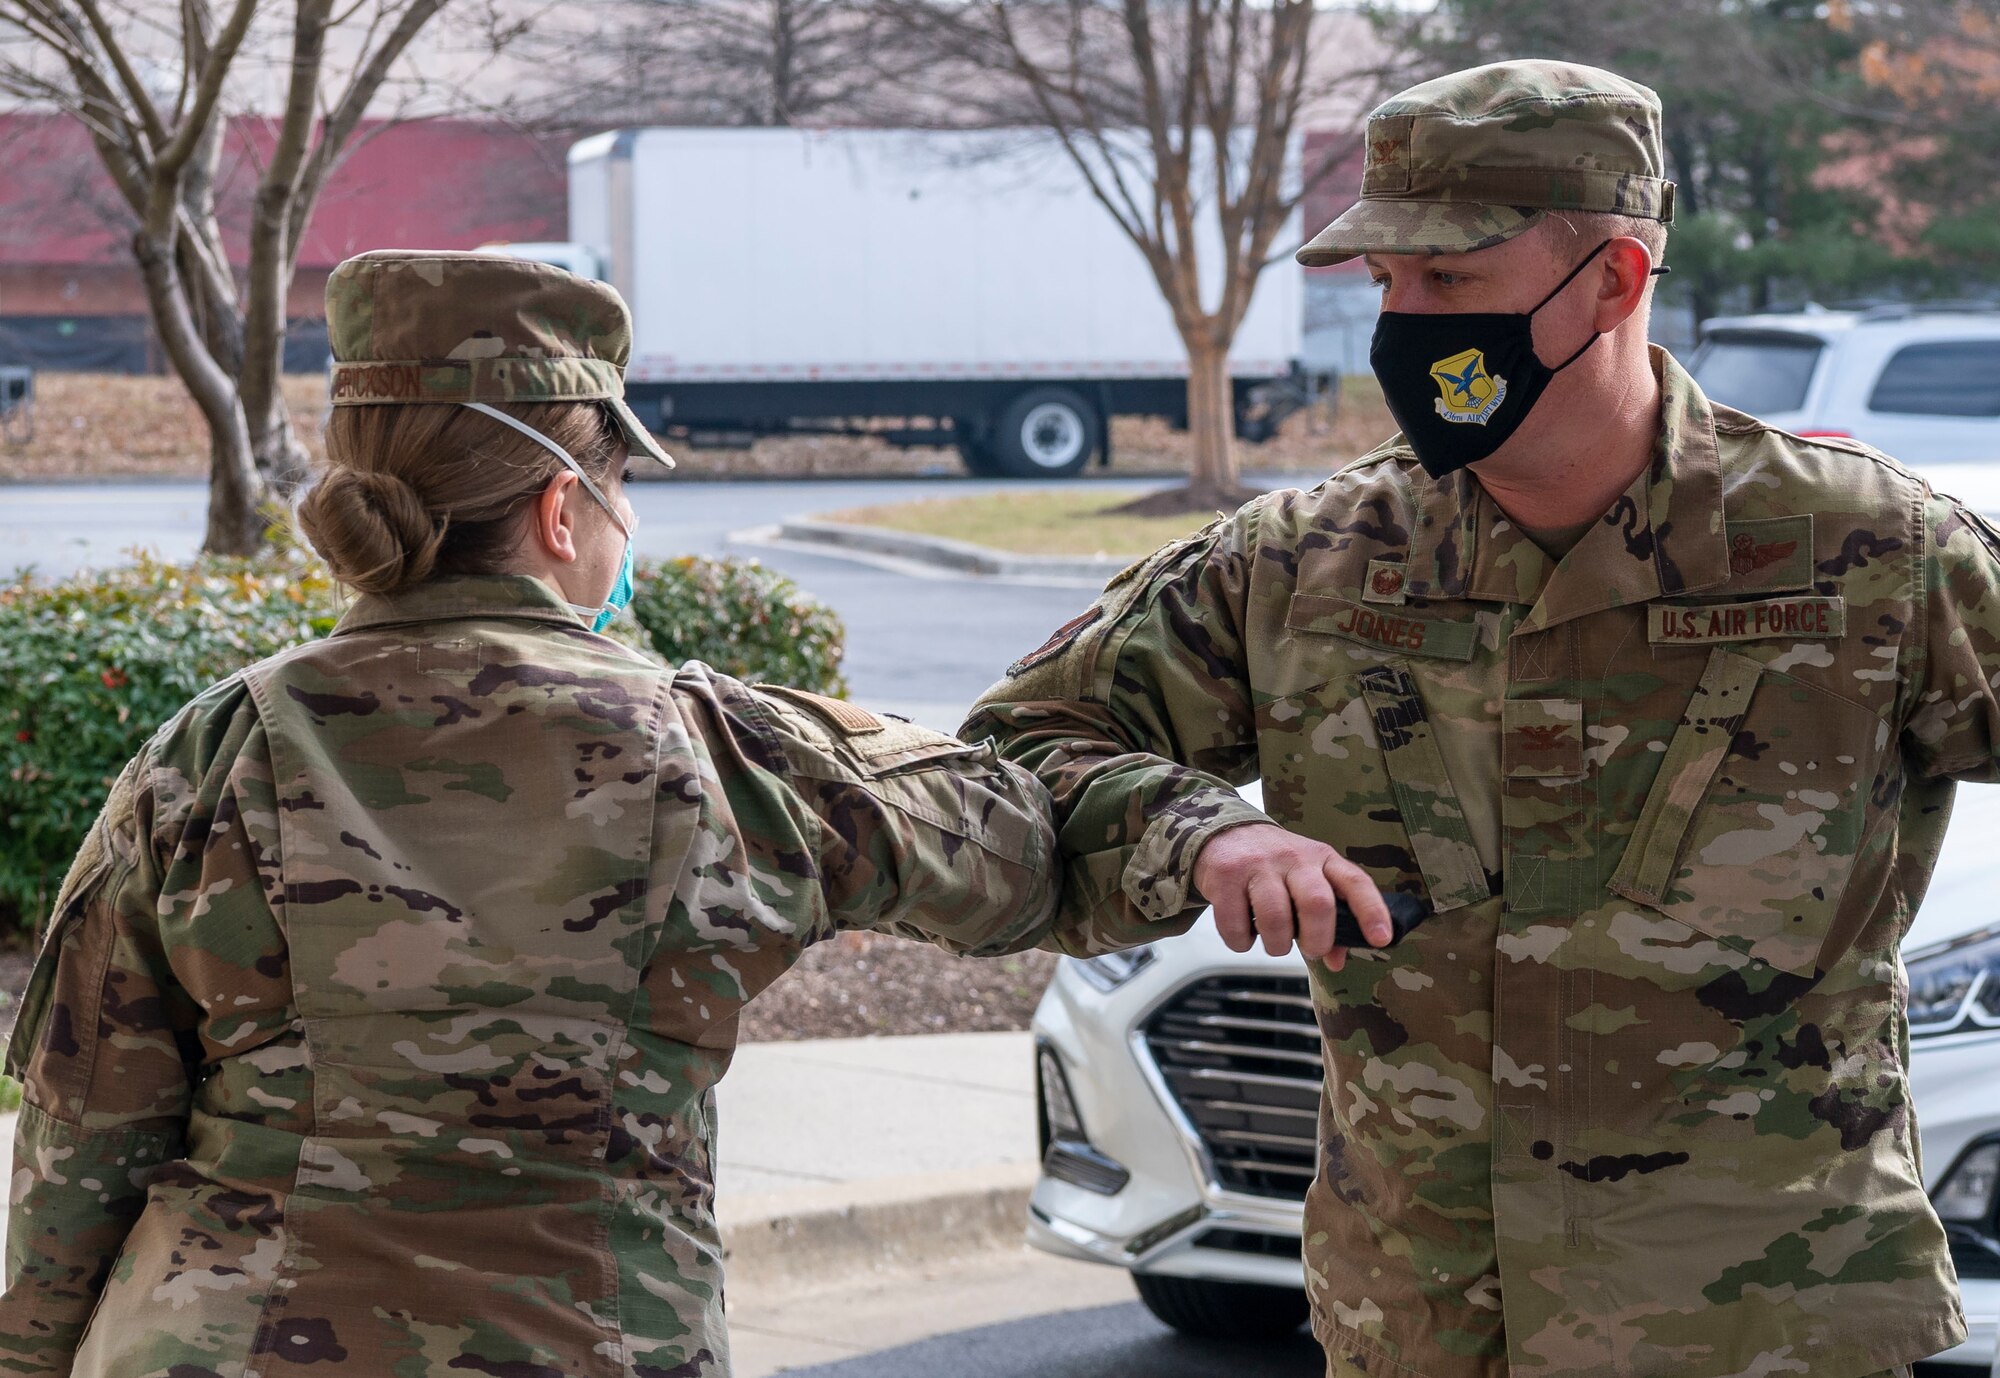 Col. Matthew Jones, 436th Airlift Wing commander, greets 1st Lt. Morgan Prestridge, 436th Mission Support Group executive officer, at a hotel in Baltimore, Maryland, Jan. 15, 2021. The hotel serves as an isolation location for Patriot Express service members who test positive for COVID-19 at the Baltimore/Washington International Thurgood Marshall Airport testing center. These service members and their families receive medical care and follow-on logistical support from Dover Air Force Base personnel. (U.S. Air Force photo by Senior Airman Christopher Quail)